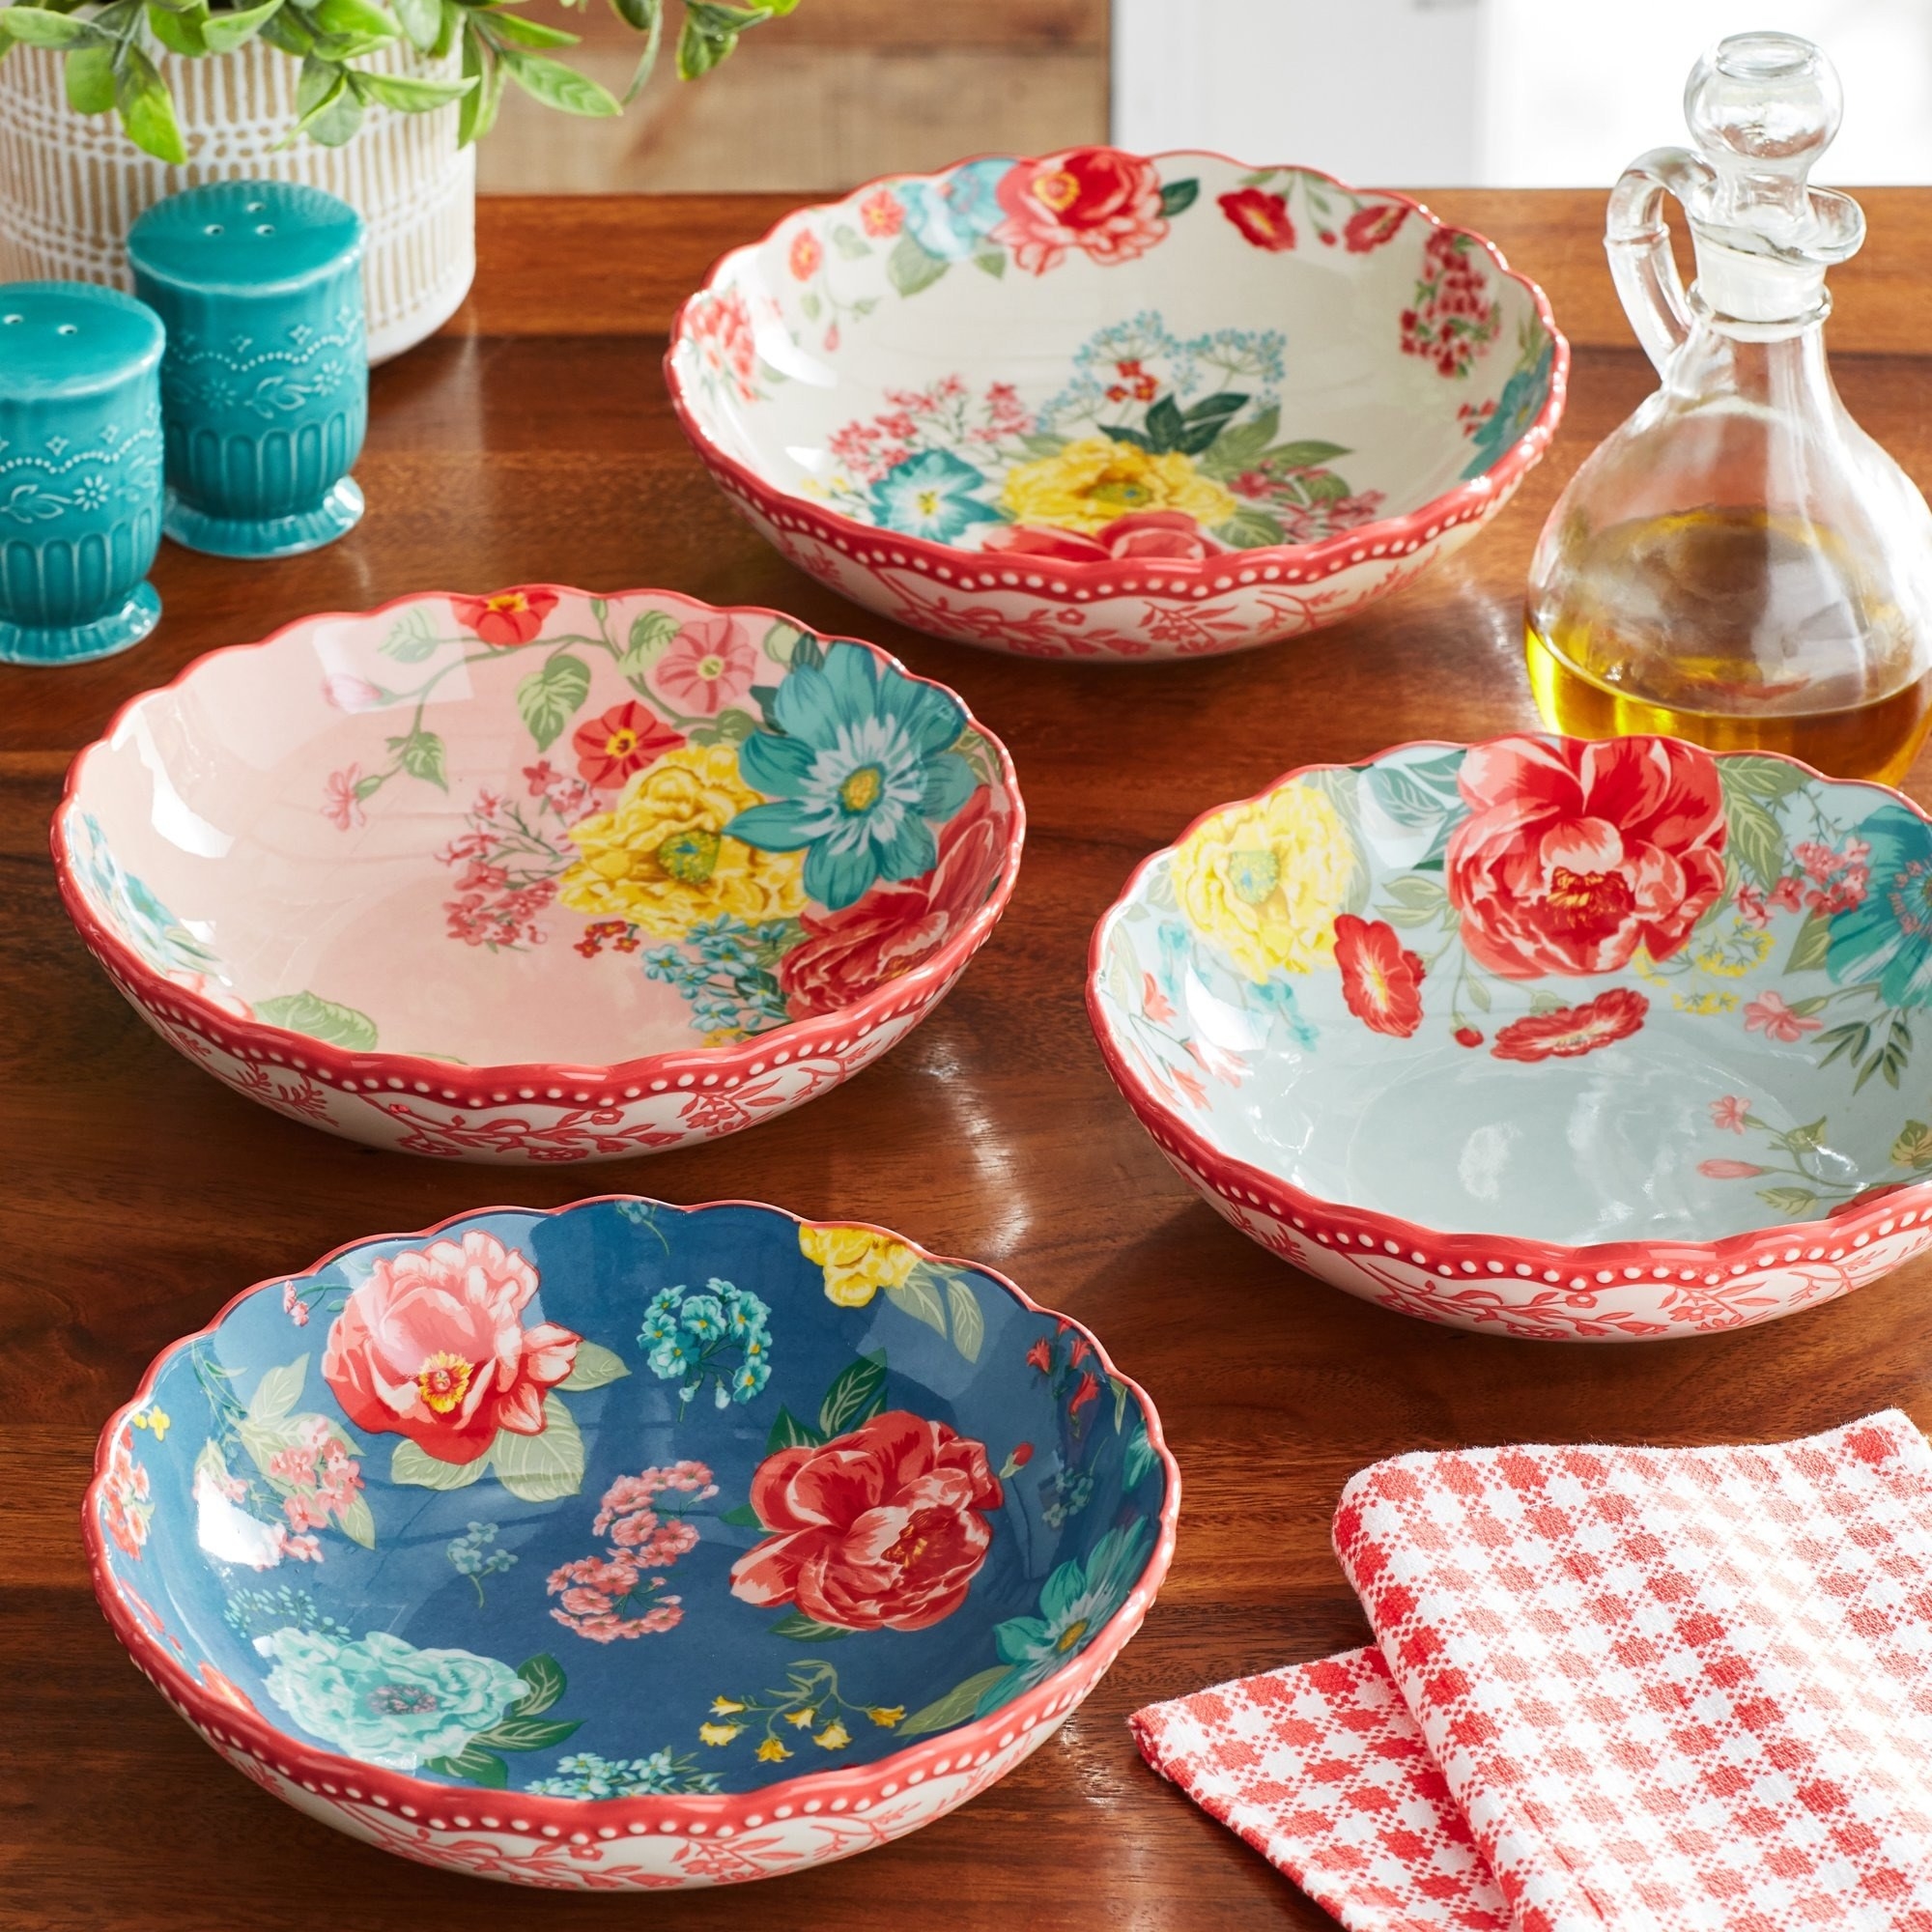 The floral pasta bowls on a table